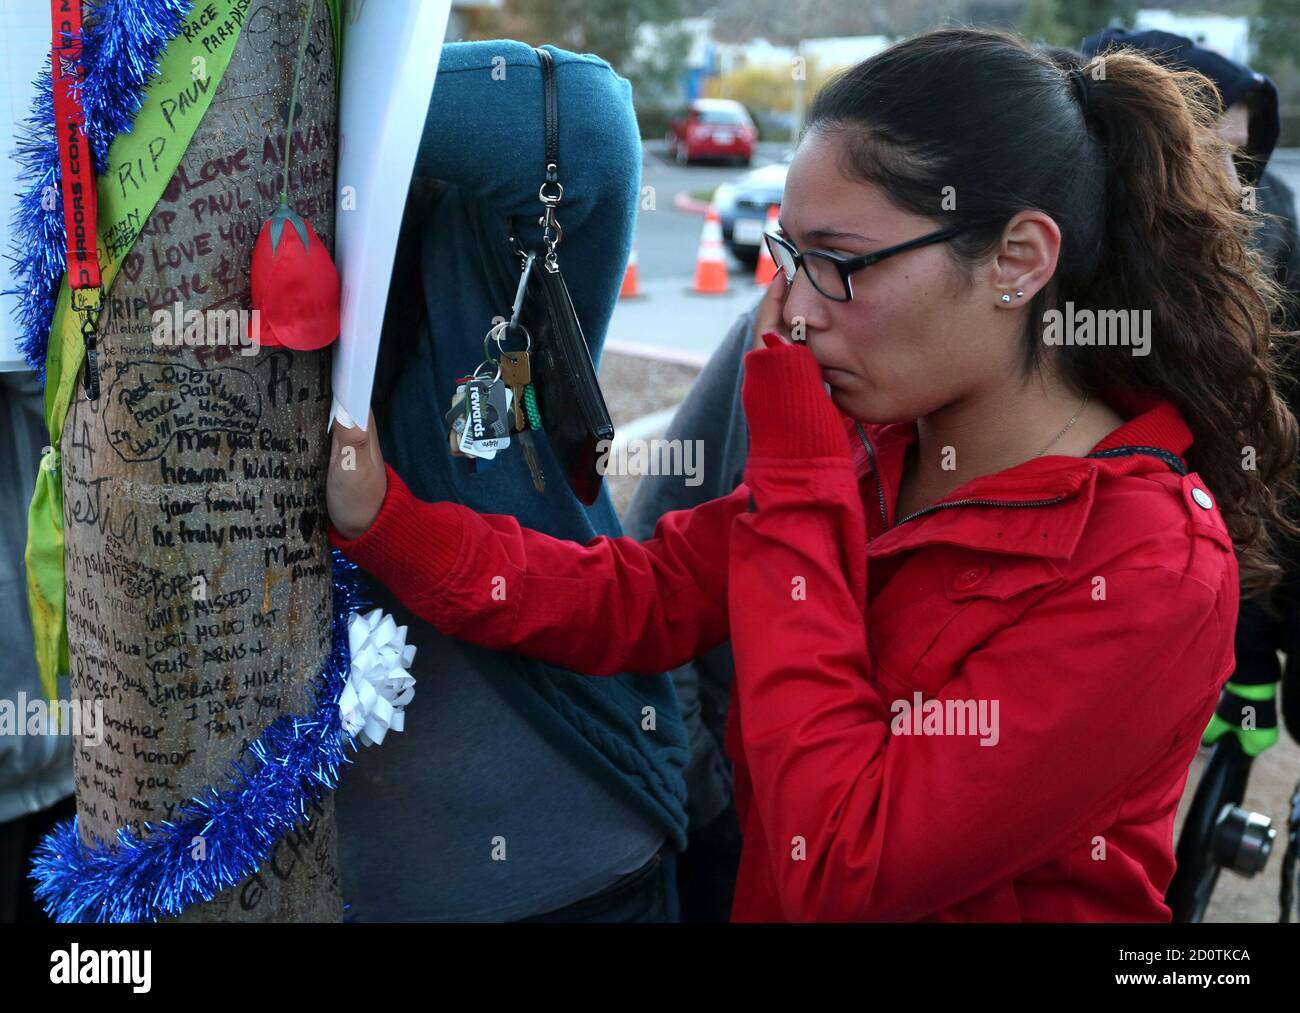 Krysha Converse wipes a tear reading notes written on a tree during an  unofficial memorial event for "Fast and Furious" star Paul Walker in Santa  Clarita, California December 8, 2013. Thousands of